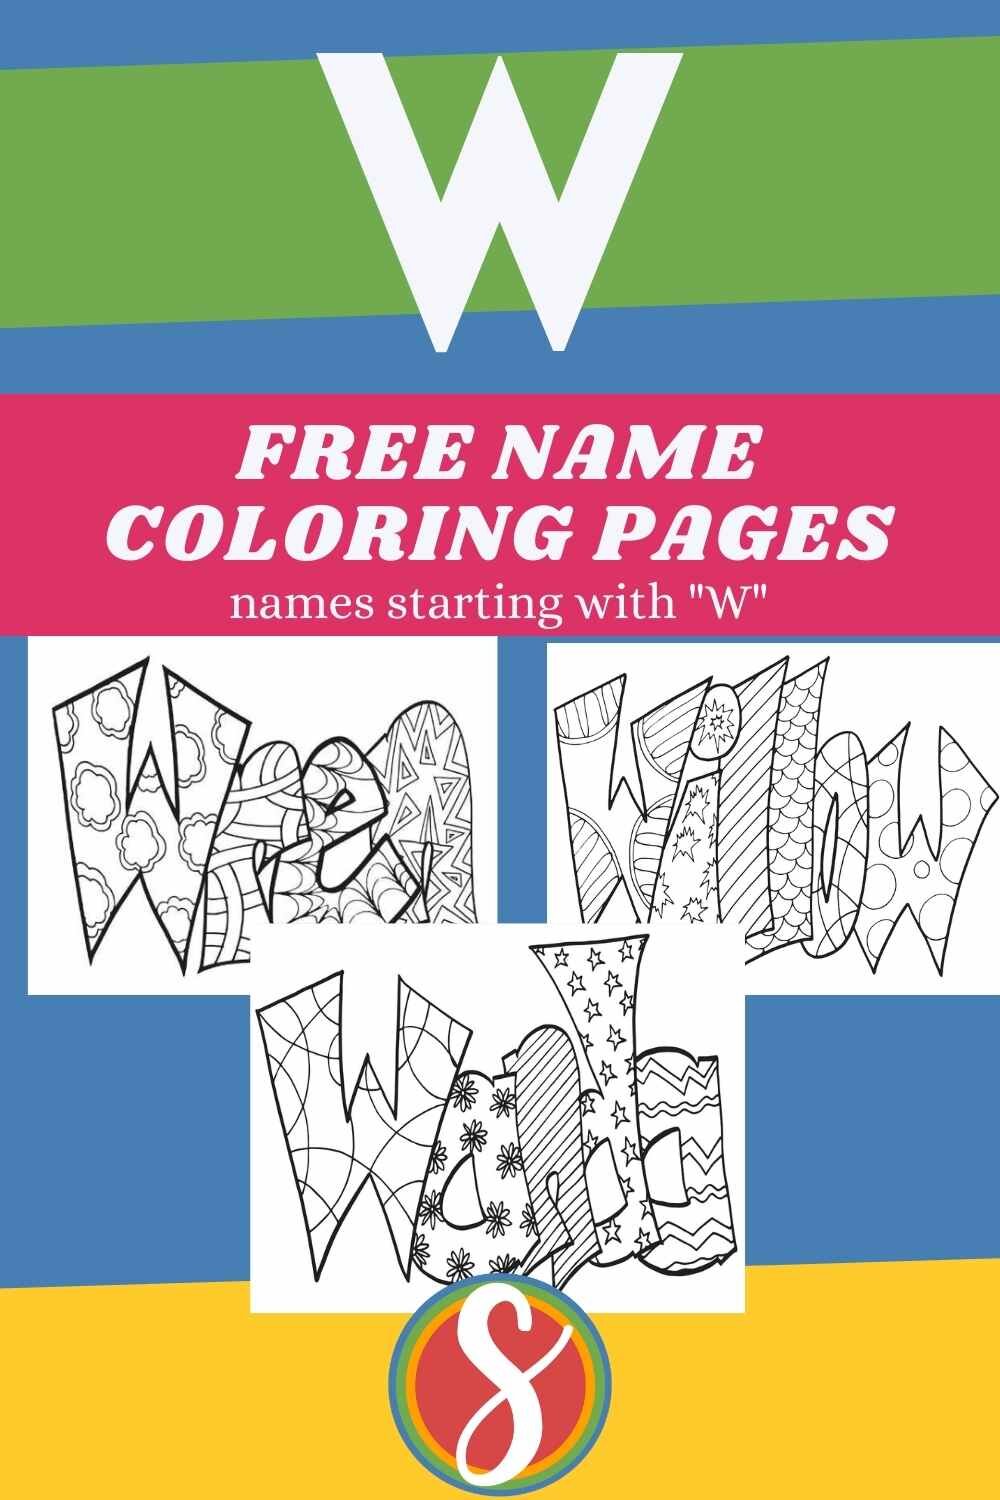 free name coloring pages letter w.jpg